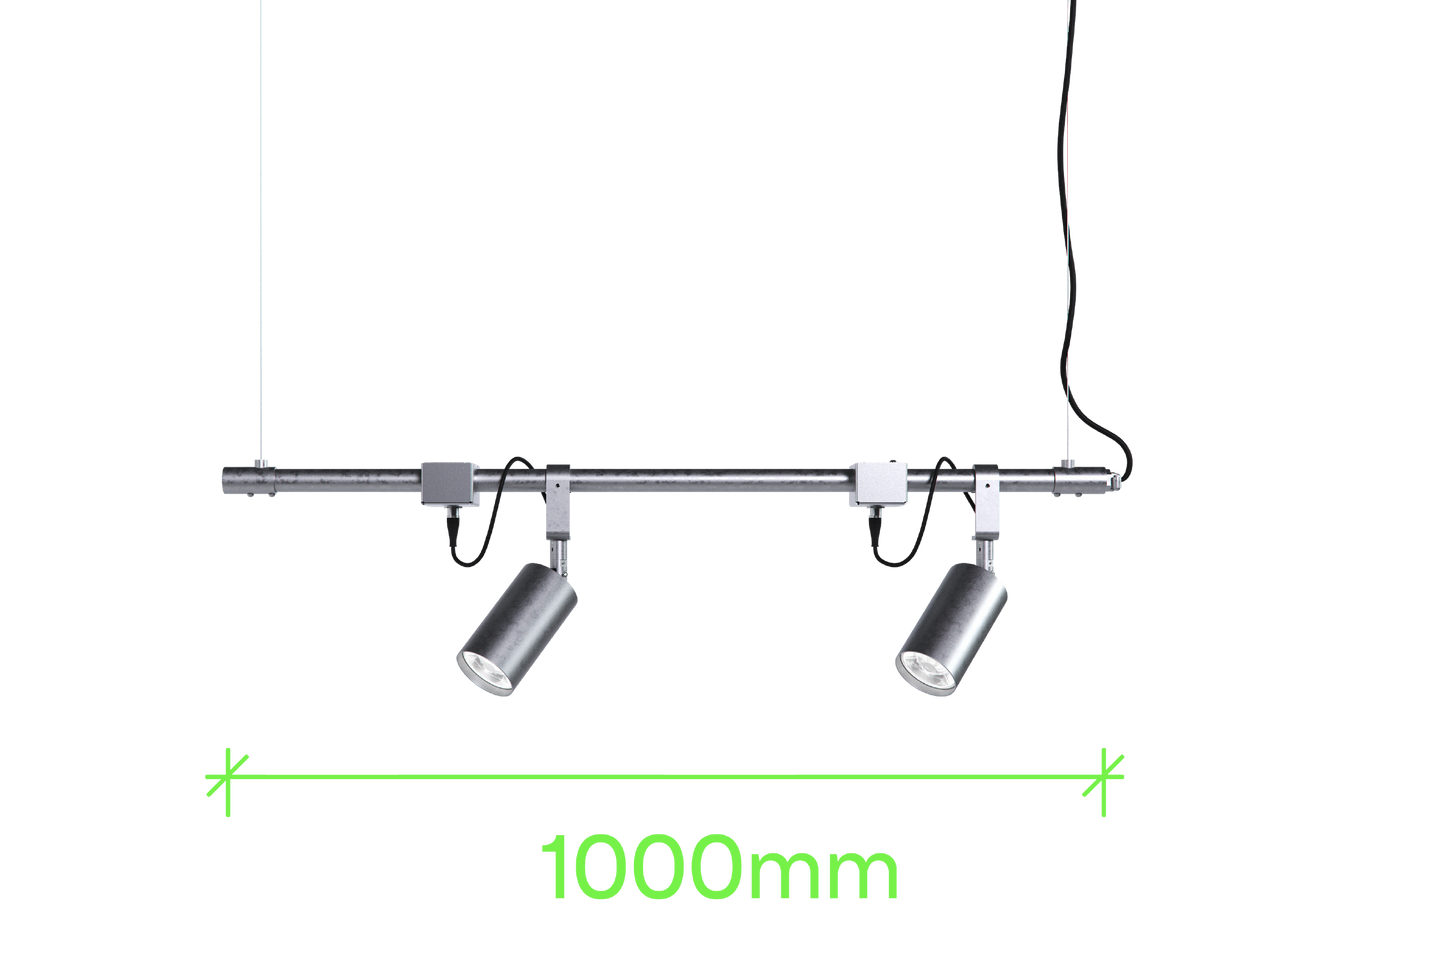 1 metre length of stainless steel Track-Pipe®, a sustainable paint-free alternative to track lighting for architects